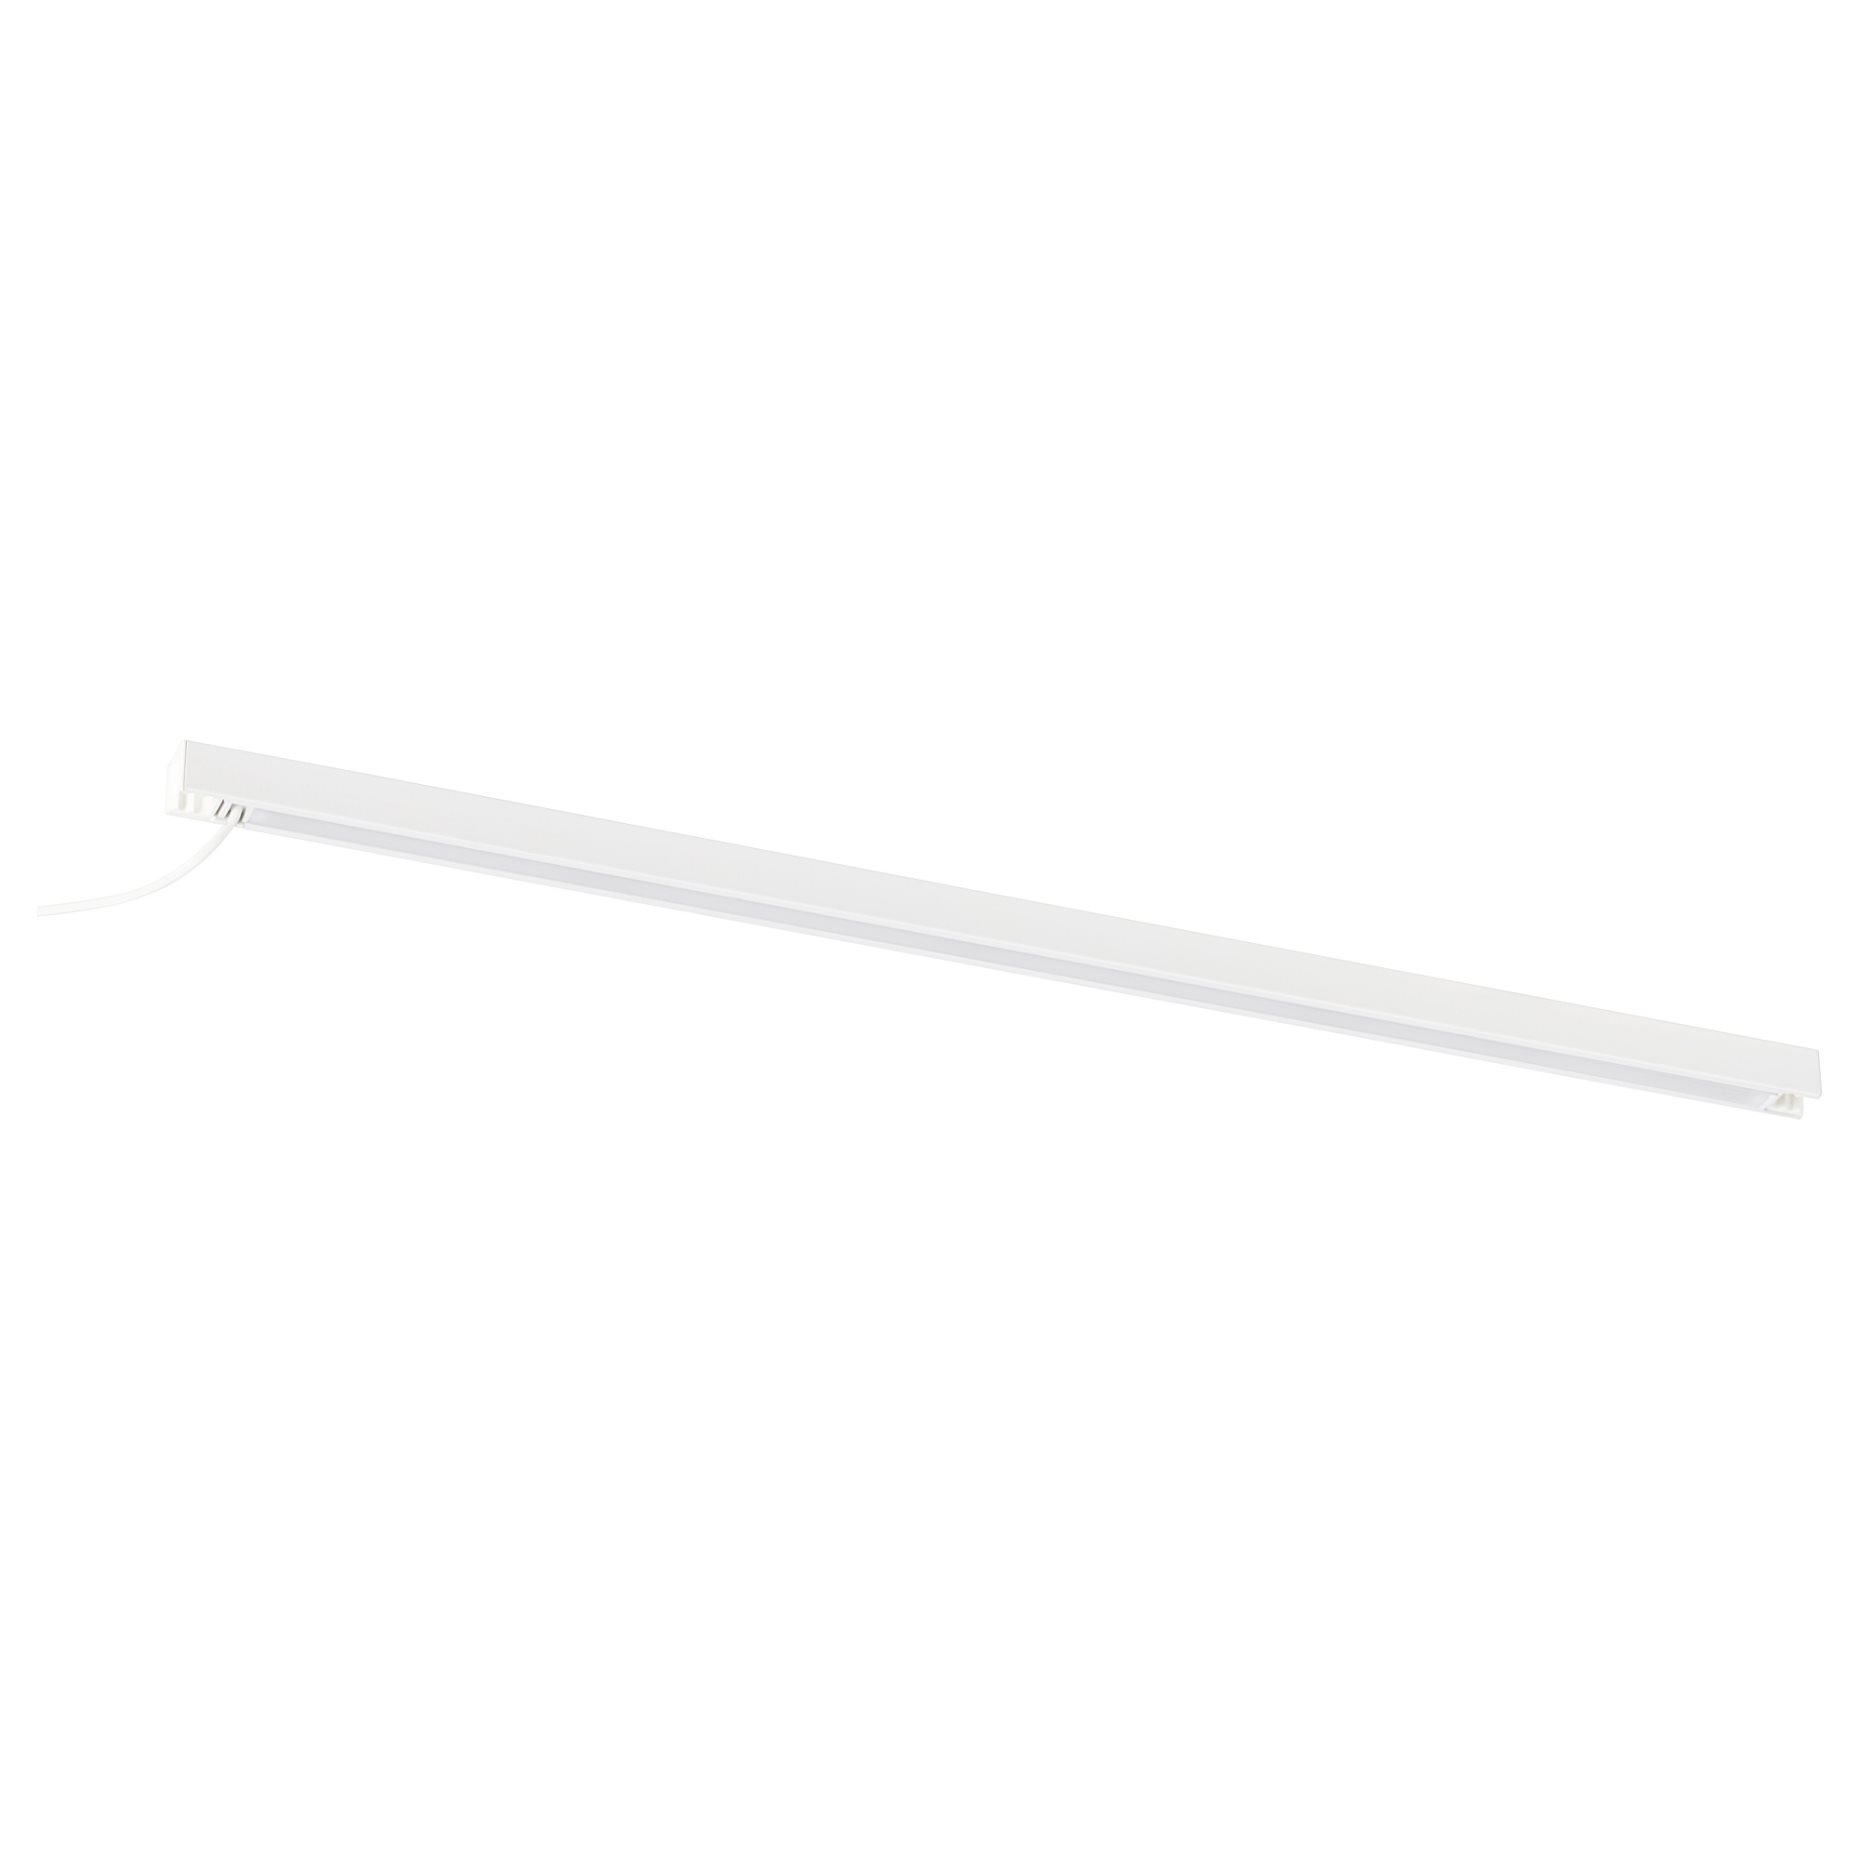 SILVERGLANS, bathroom lighting strip with built-in LED light source/dimmable, 60 cm, 105.292.27